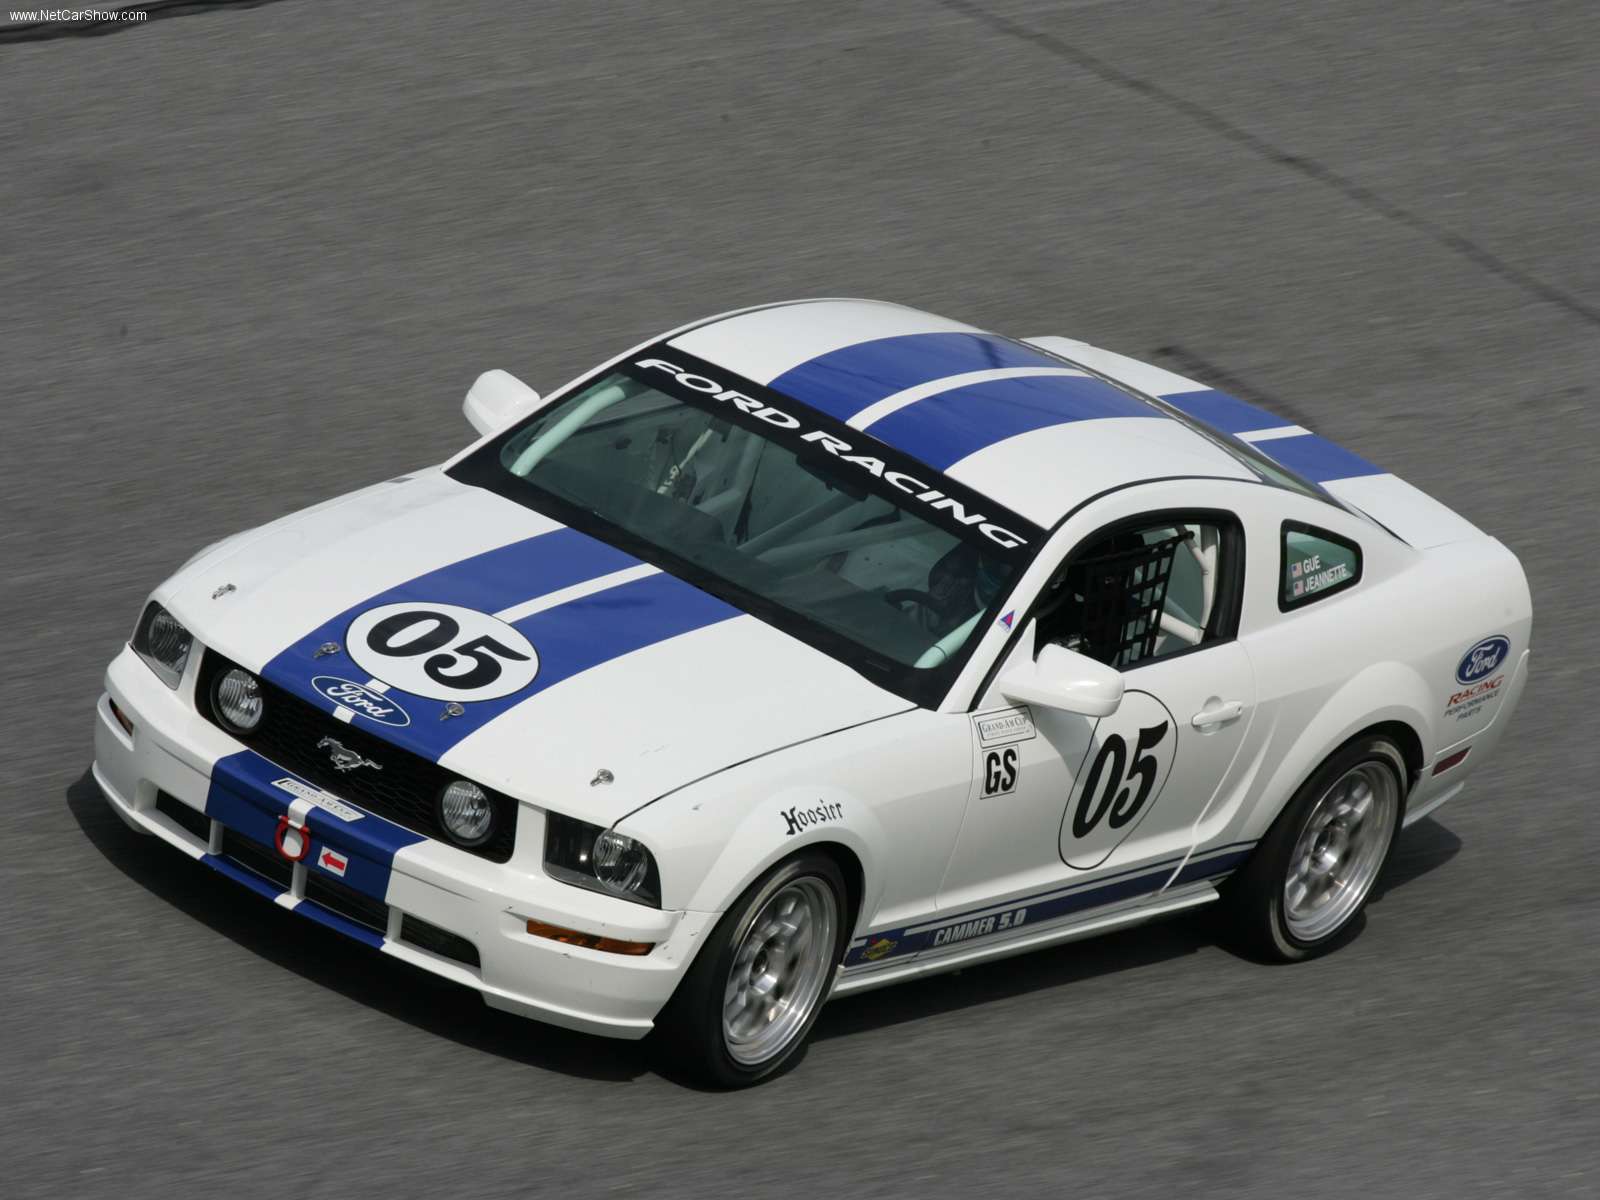 Download full size White Race Mustang Ford wallpaper / 1600x1200